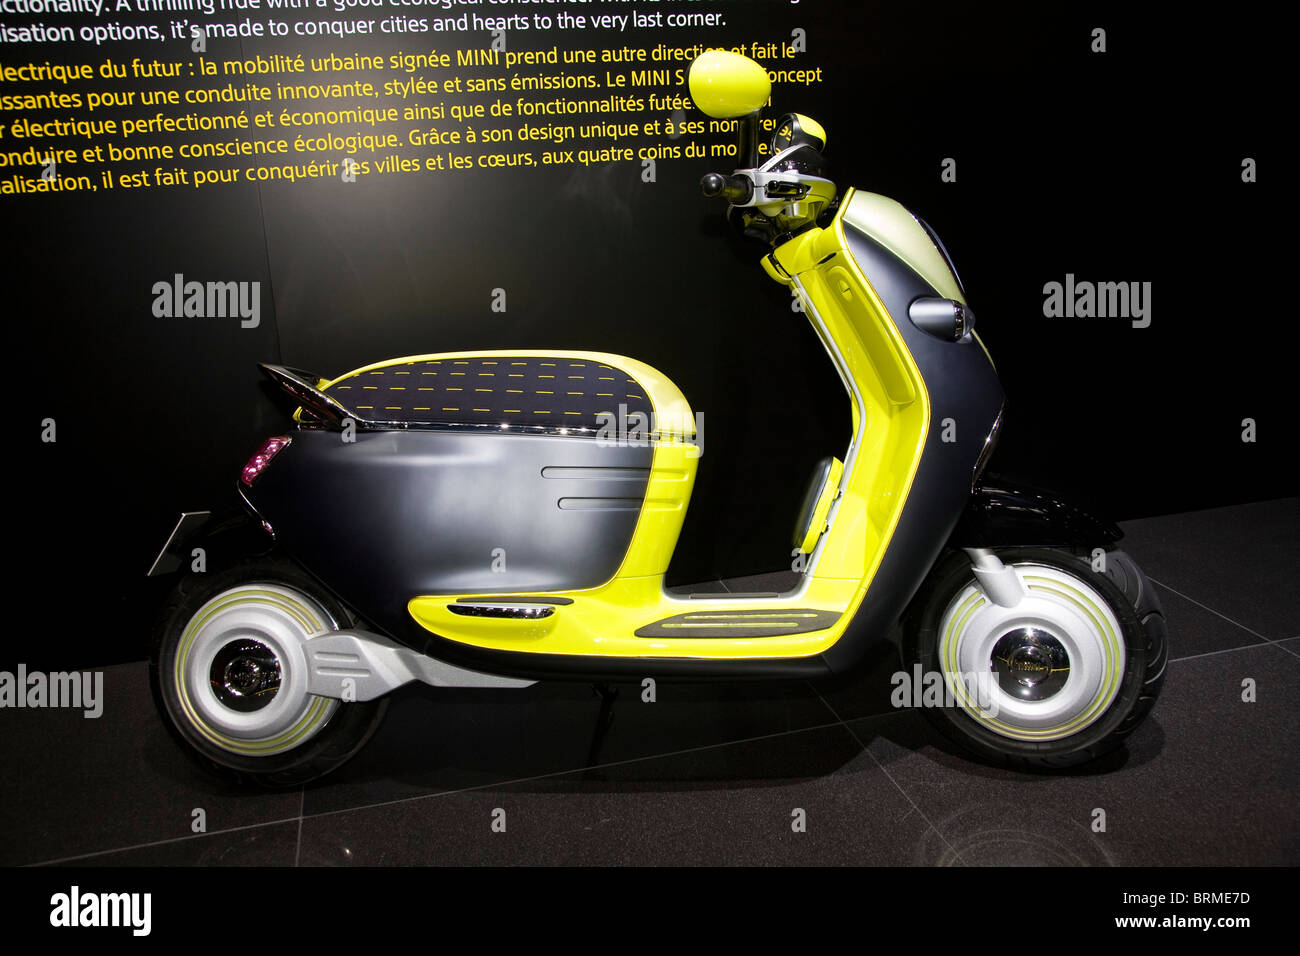 Paris motor show 2010 and the Mini electric scooter Stock Photo